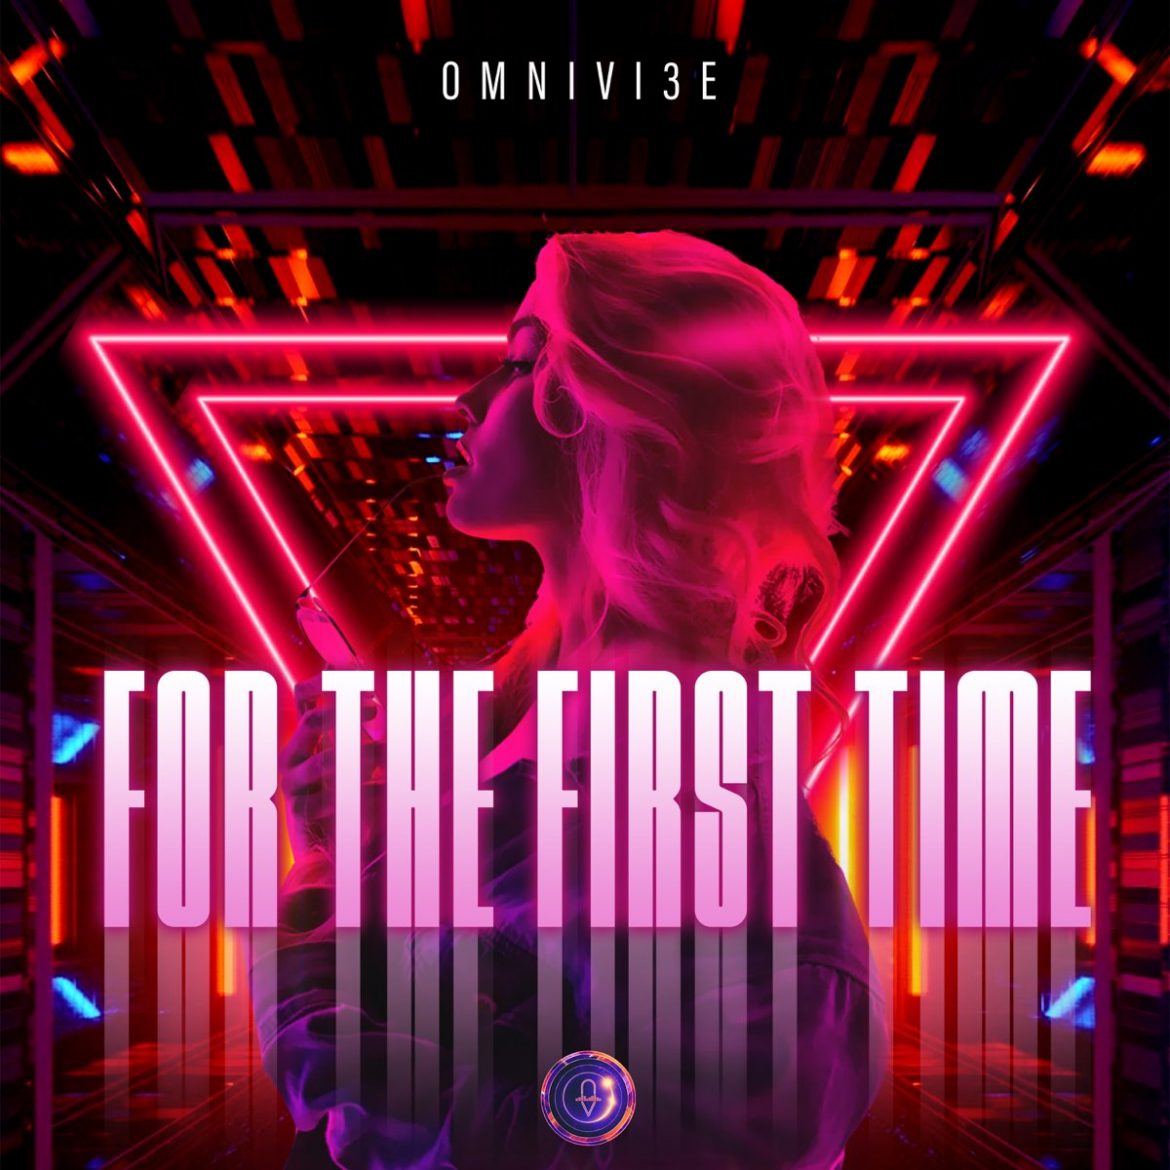 South Africa’s global R&B star ‘Byron Major’ teams with ‘OMNIVI3E’ delivering a hot new hit ‘Paradise’ a collaboration with ‘Andy Whitmore’.